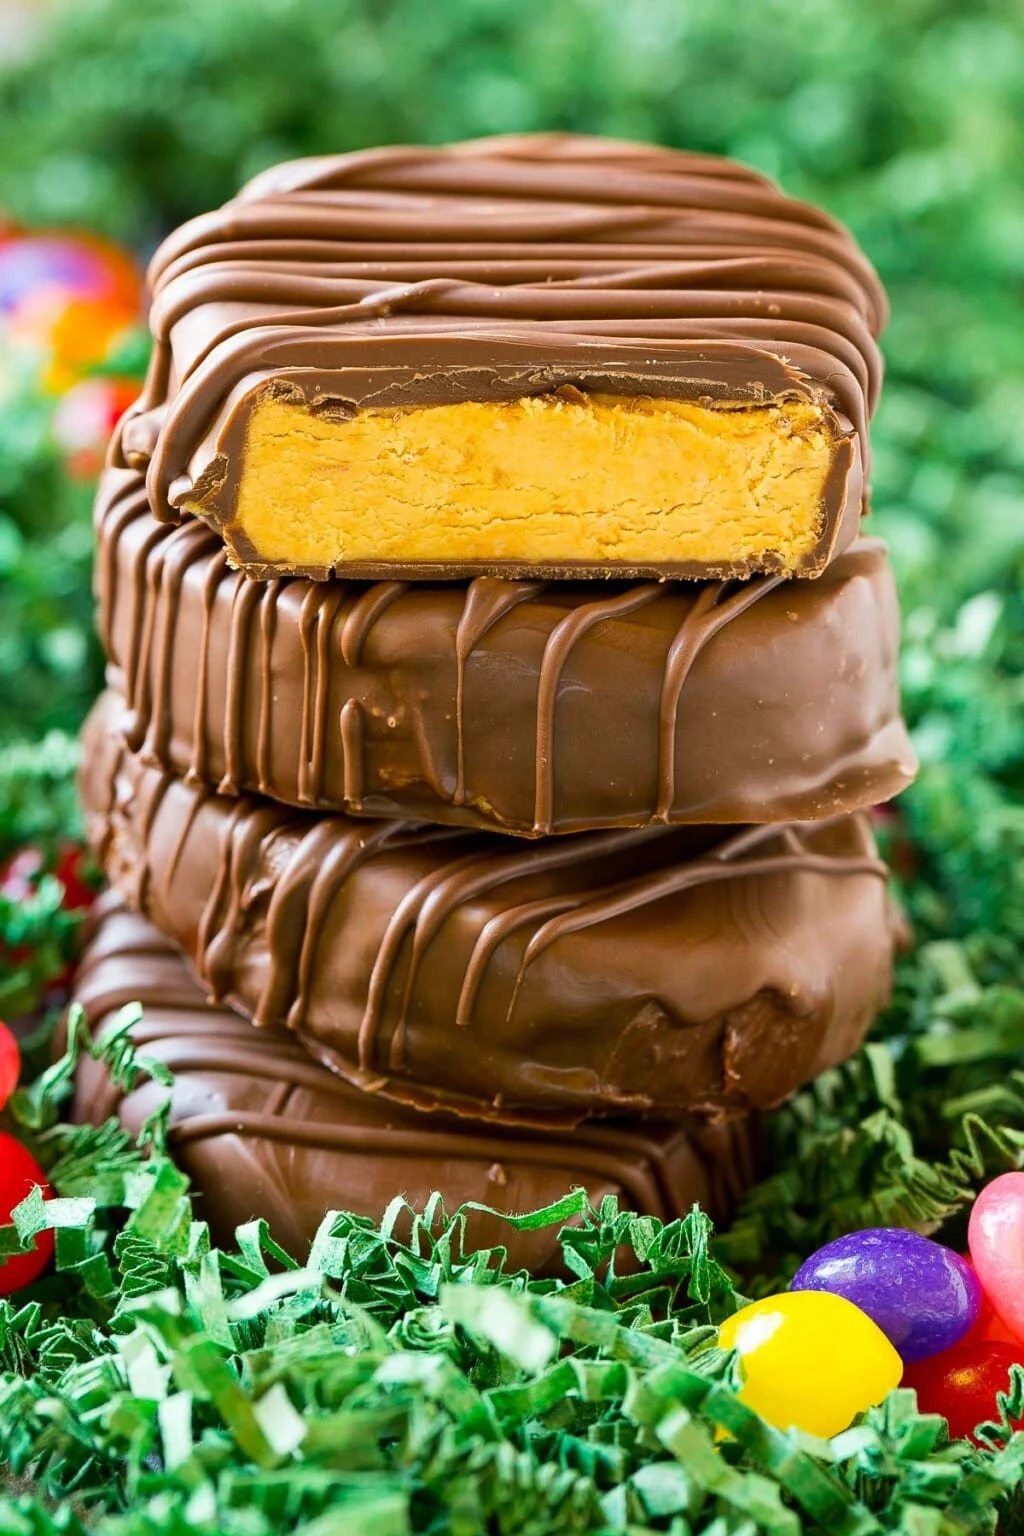 Homemade Peanut Butter Eggs easter candy recipes for fun and festive homemade treats 